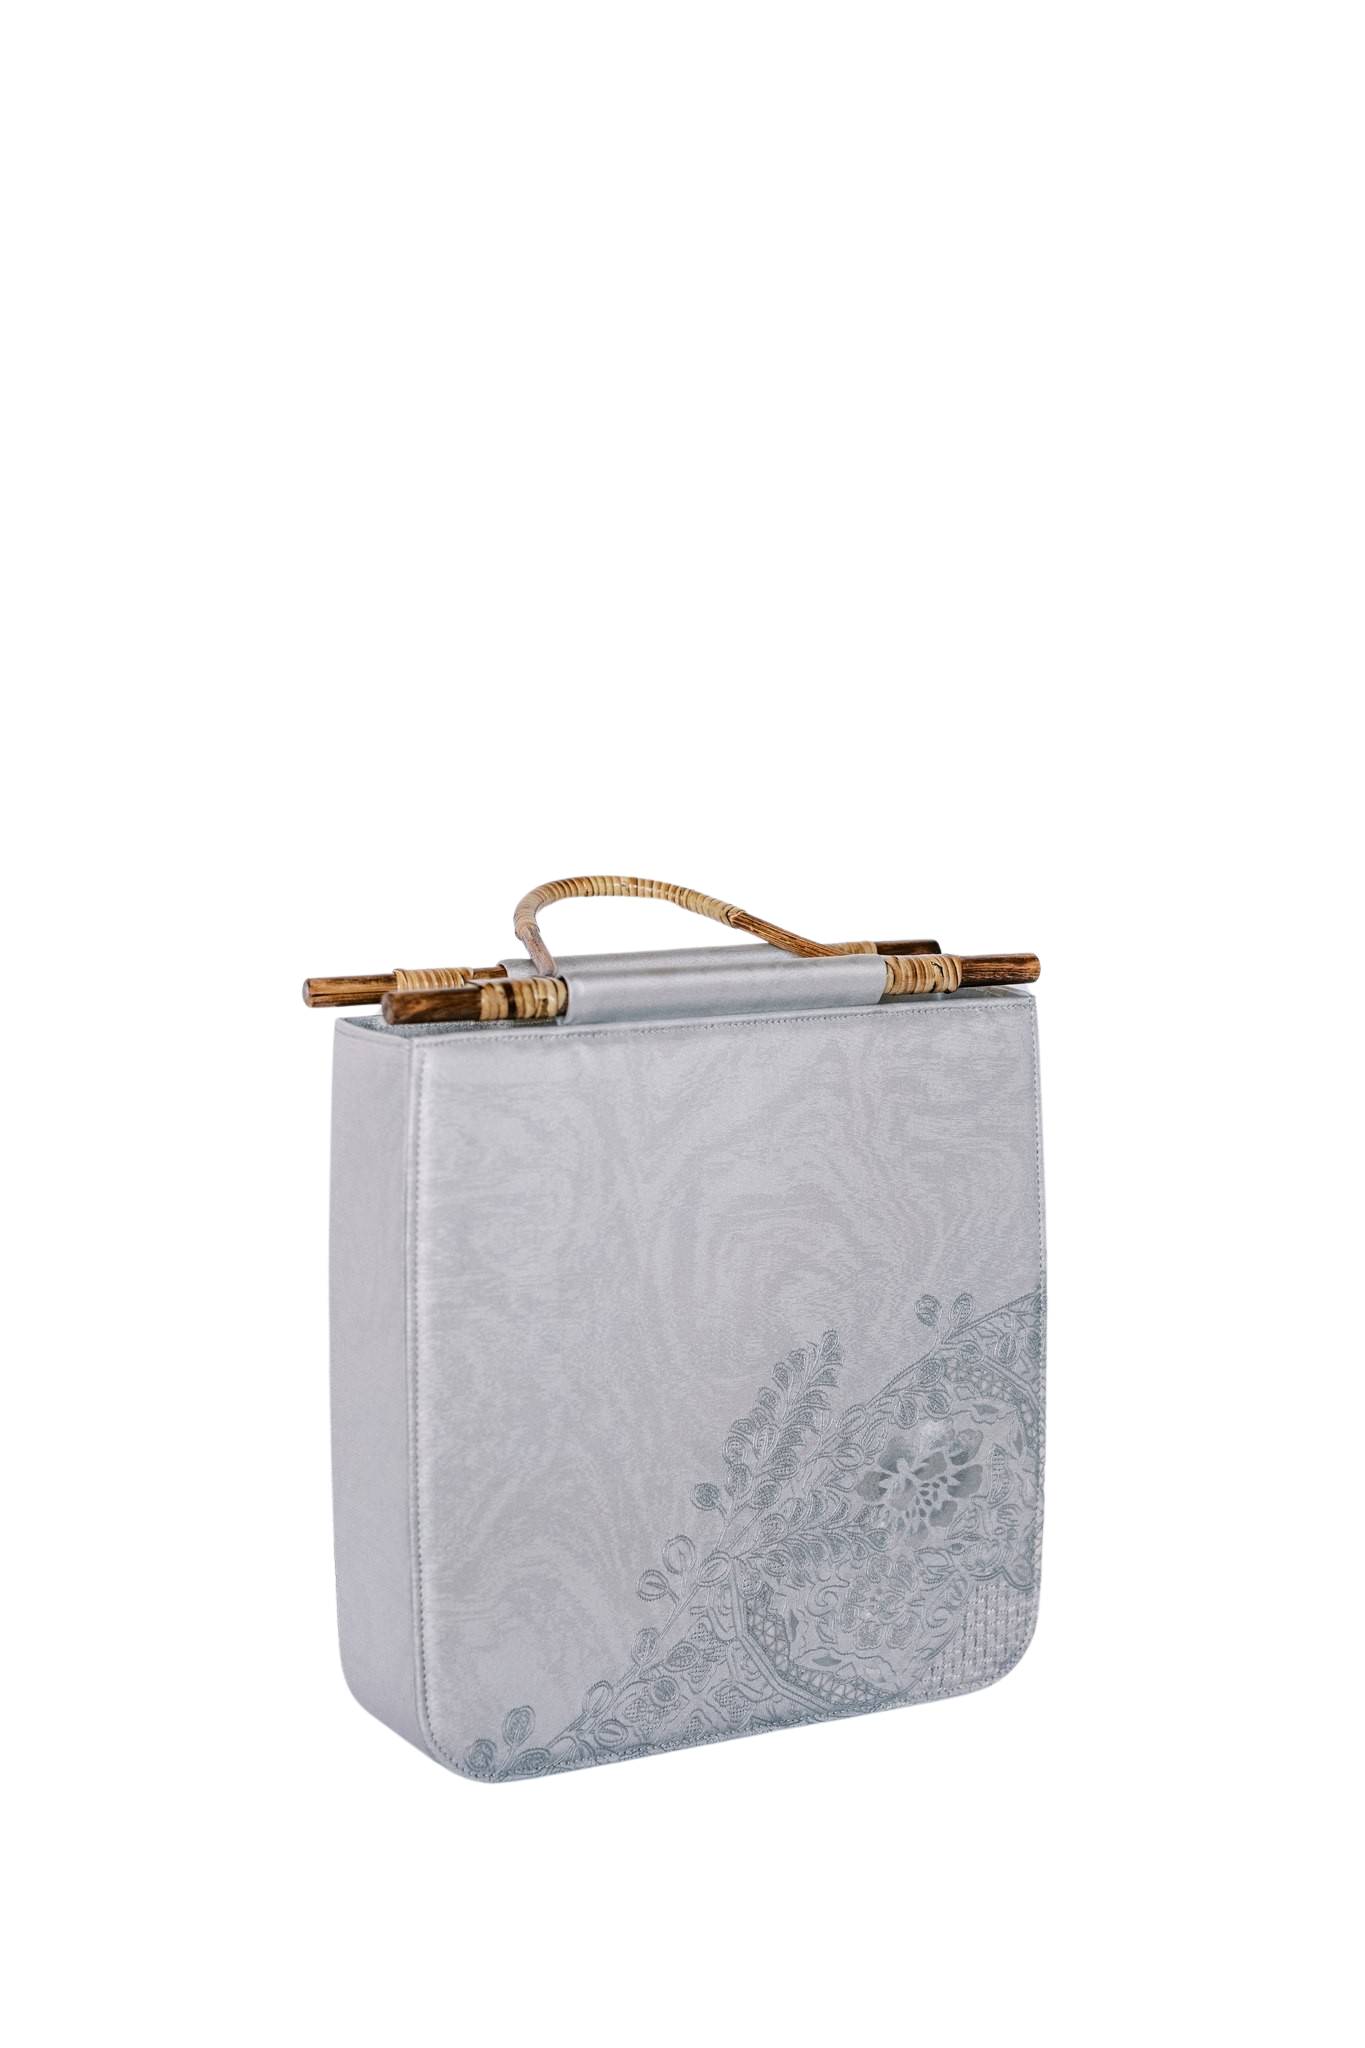 Jinza Oriental Couture Wedding Accessories | Vintage Silver Handbags for the Mother of the Bride and Groom